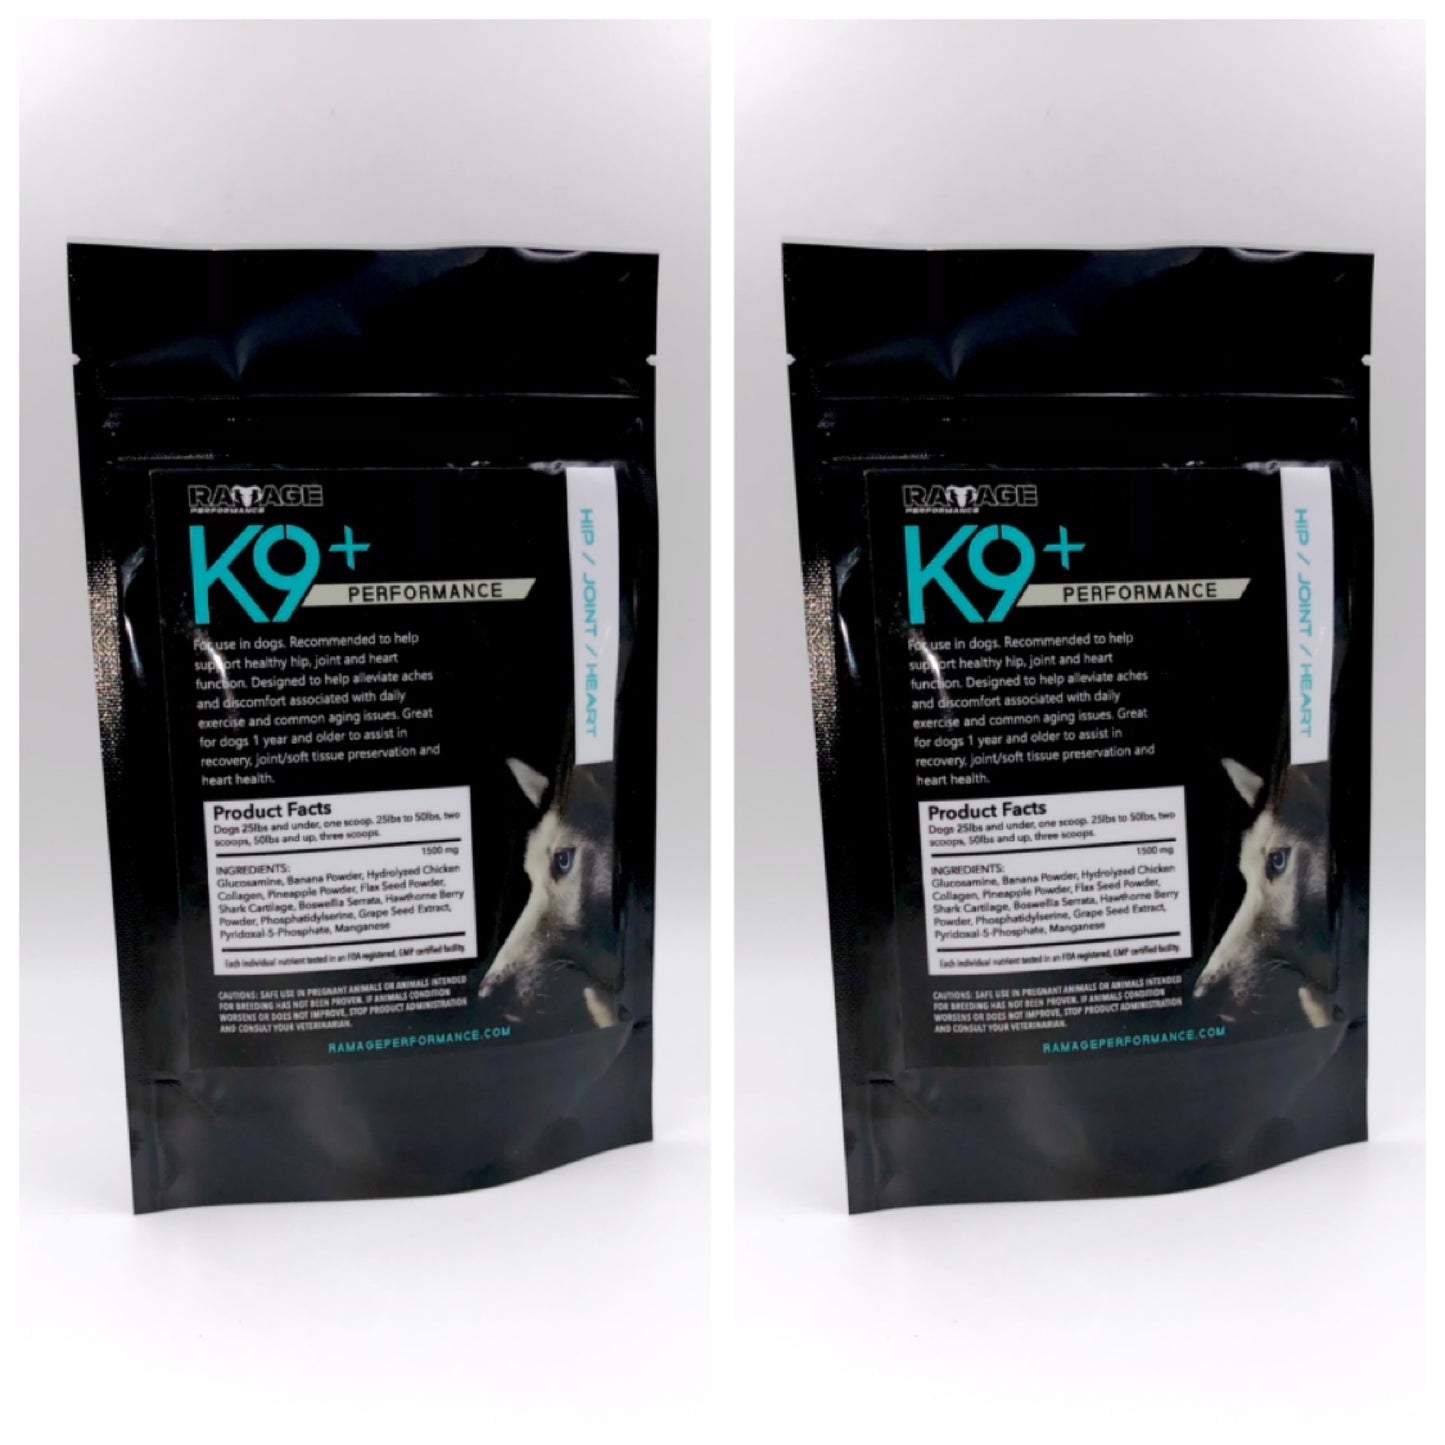 K9+ Performance for dogs (2 bags)